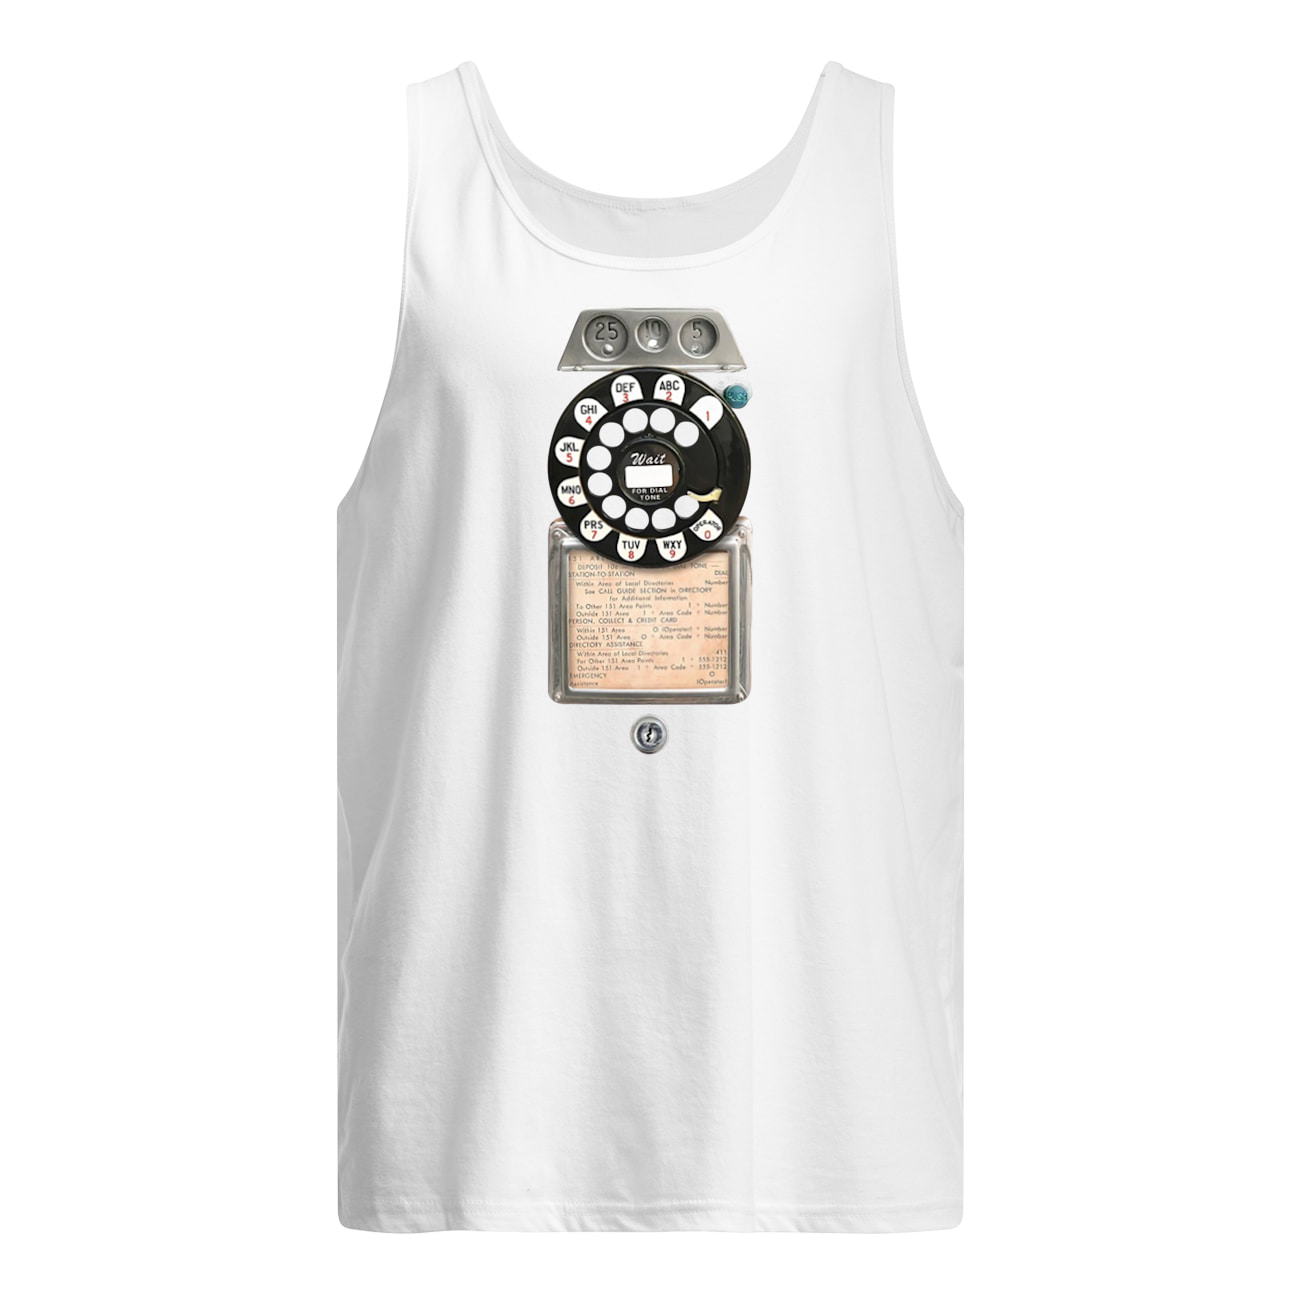 Retro rotary phone dial on graphic tank top